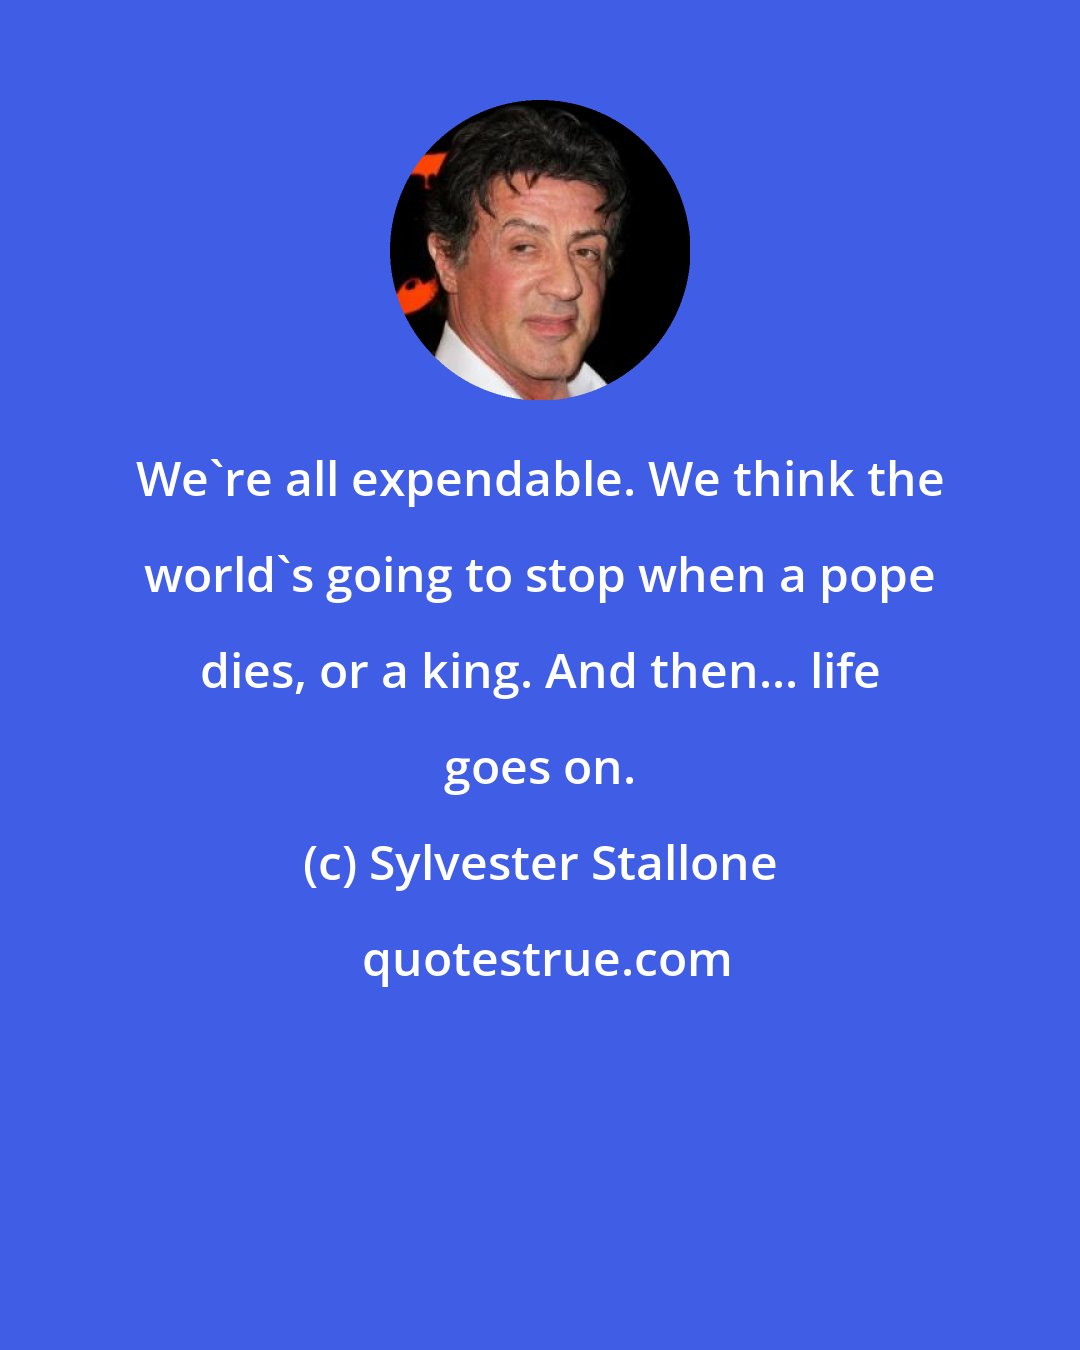 Sylvester Stallone: We're all expendable. We think the world's going to stop when a pope dies, or a king. And then... life goes on.